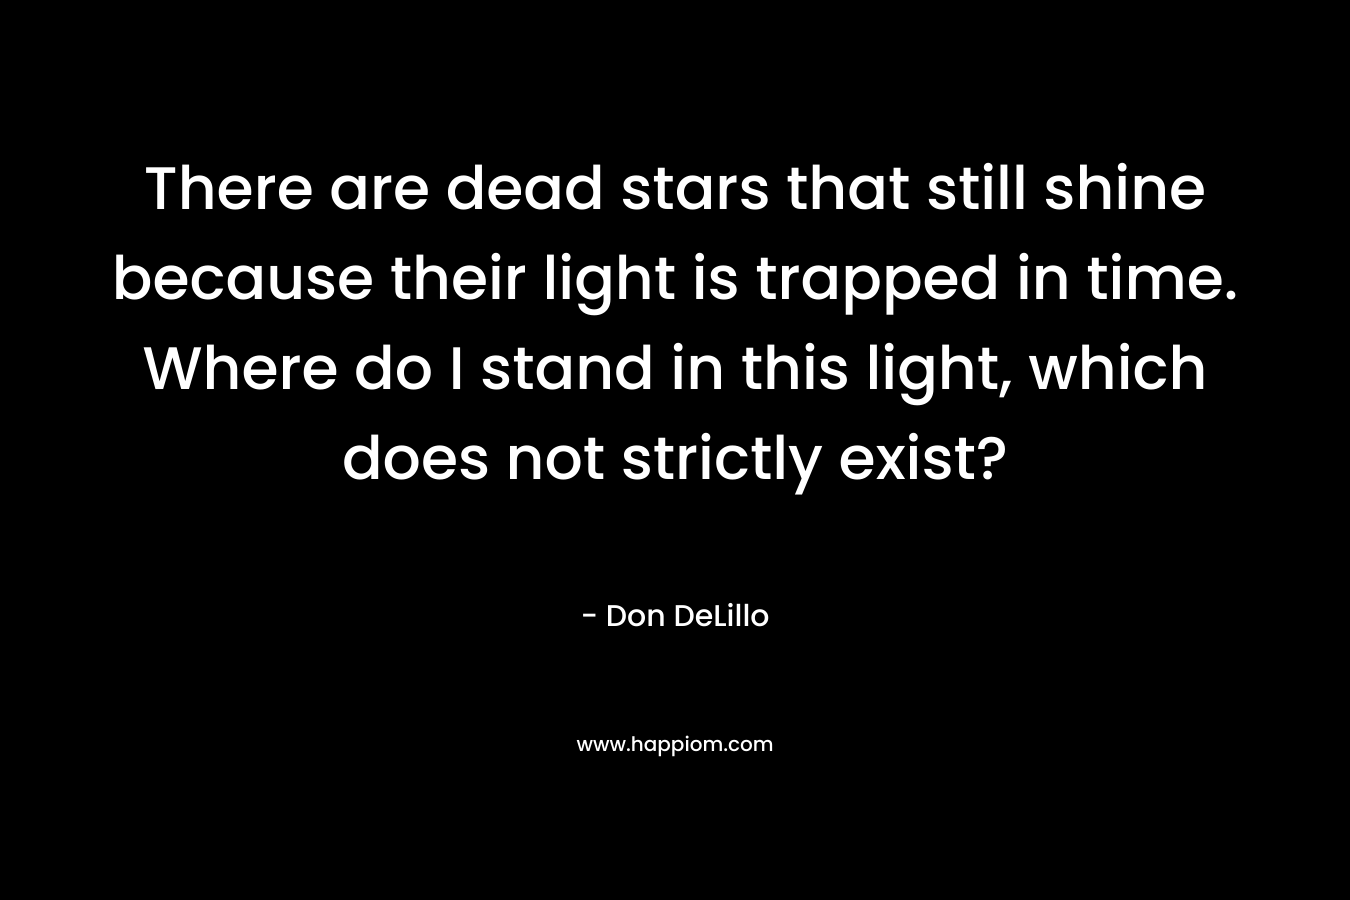 There are dead stars that still shine because their light is trapped in time. Where do I stand in this light, which does not strictly exist?